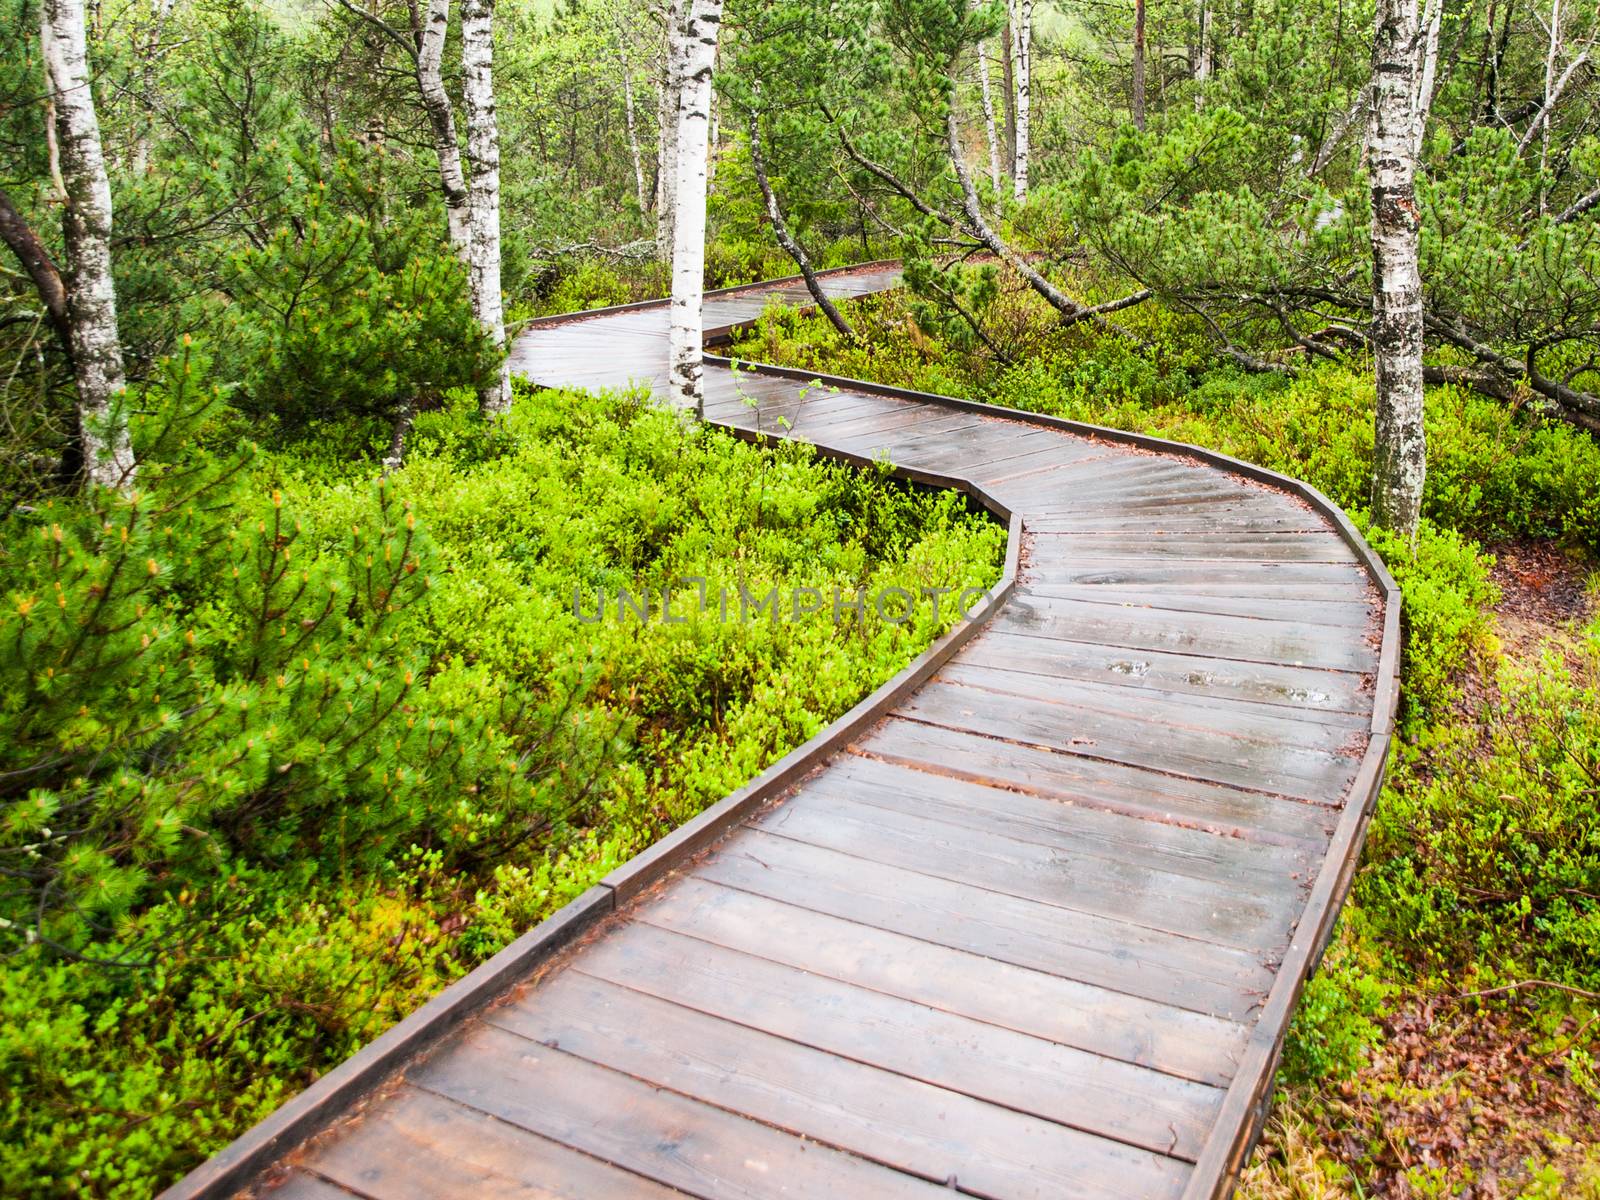 Narrow wooden path in the birch forest. Planks are wet and shiny after rain. Chalupska moor in Sumava National Park, Czech Republic